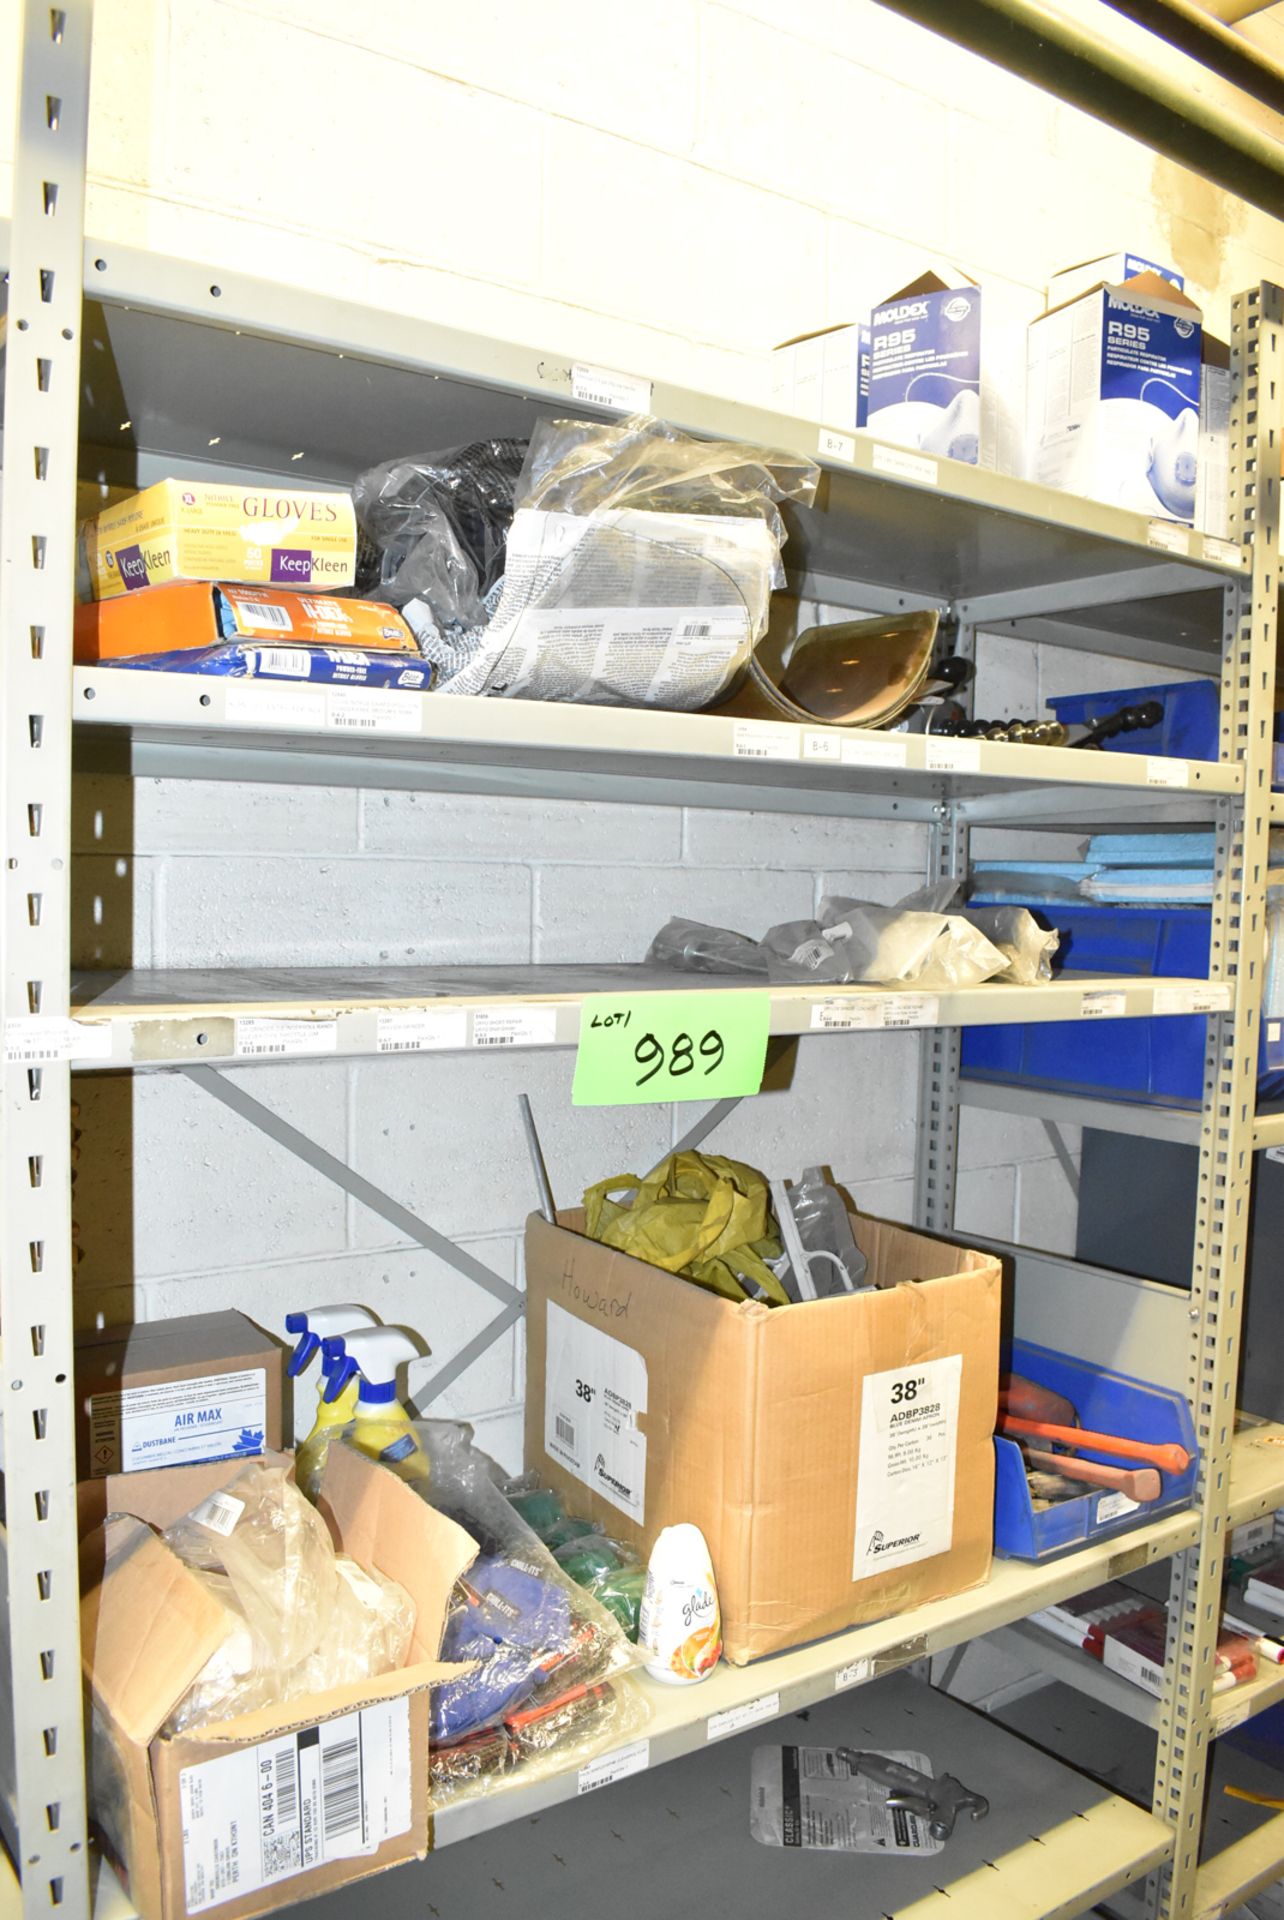 LOT/ CONTENTS OF SHELF - PPE, CLEANING SUPPLIES & TOOLS